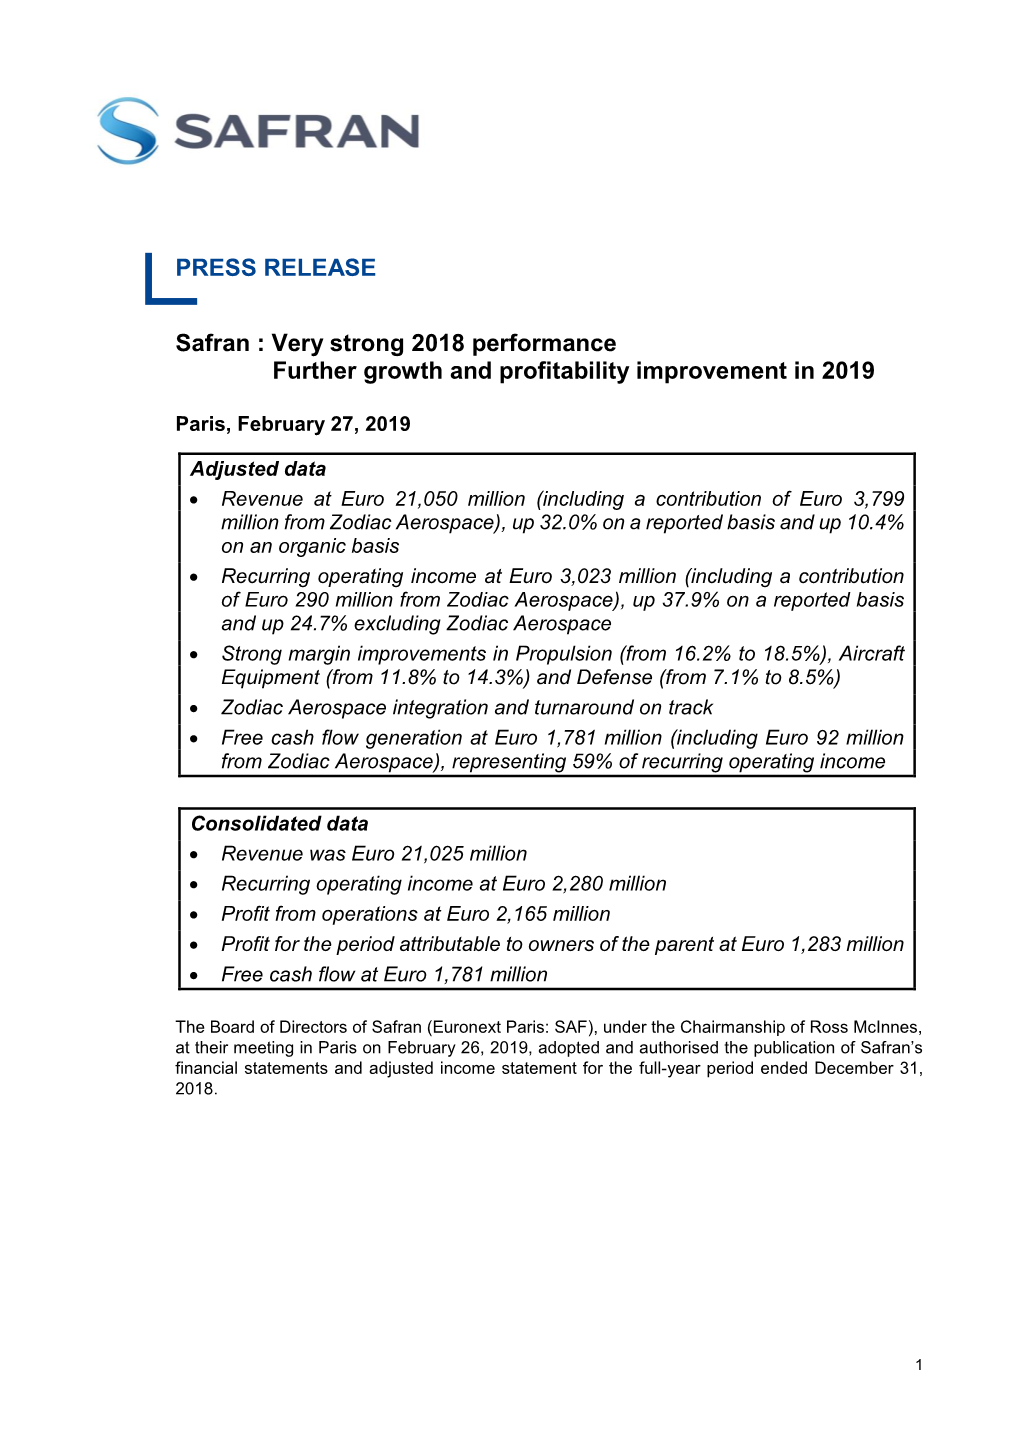 Very Strong 2018 Performance Further Growth and Profitability Improvement in 2019